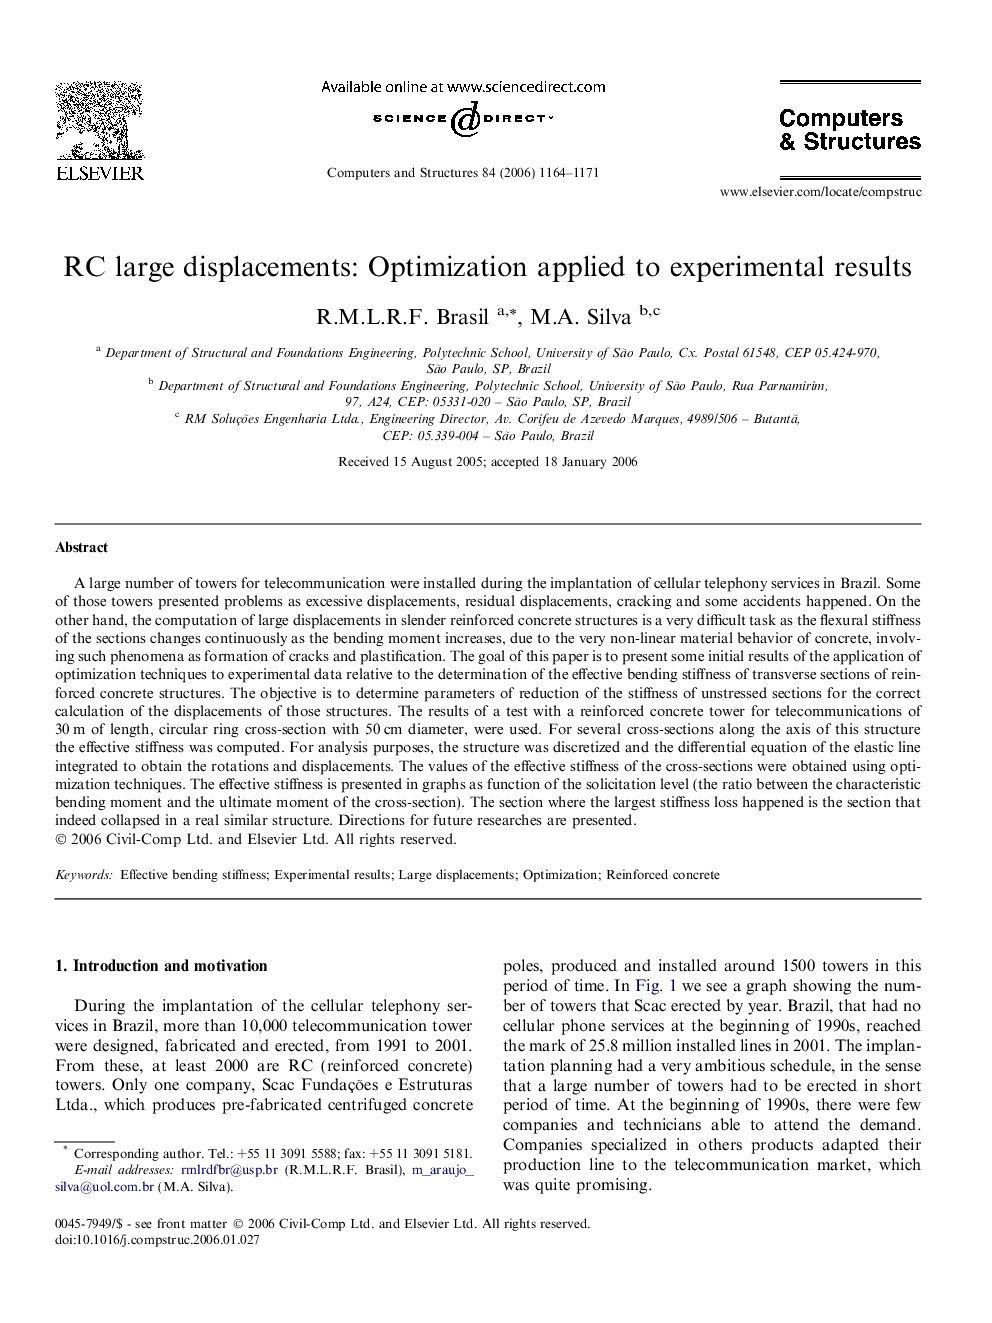 RC large displacements: Optimization applied to experimental results